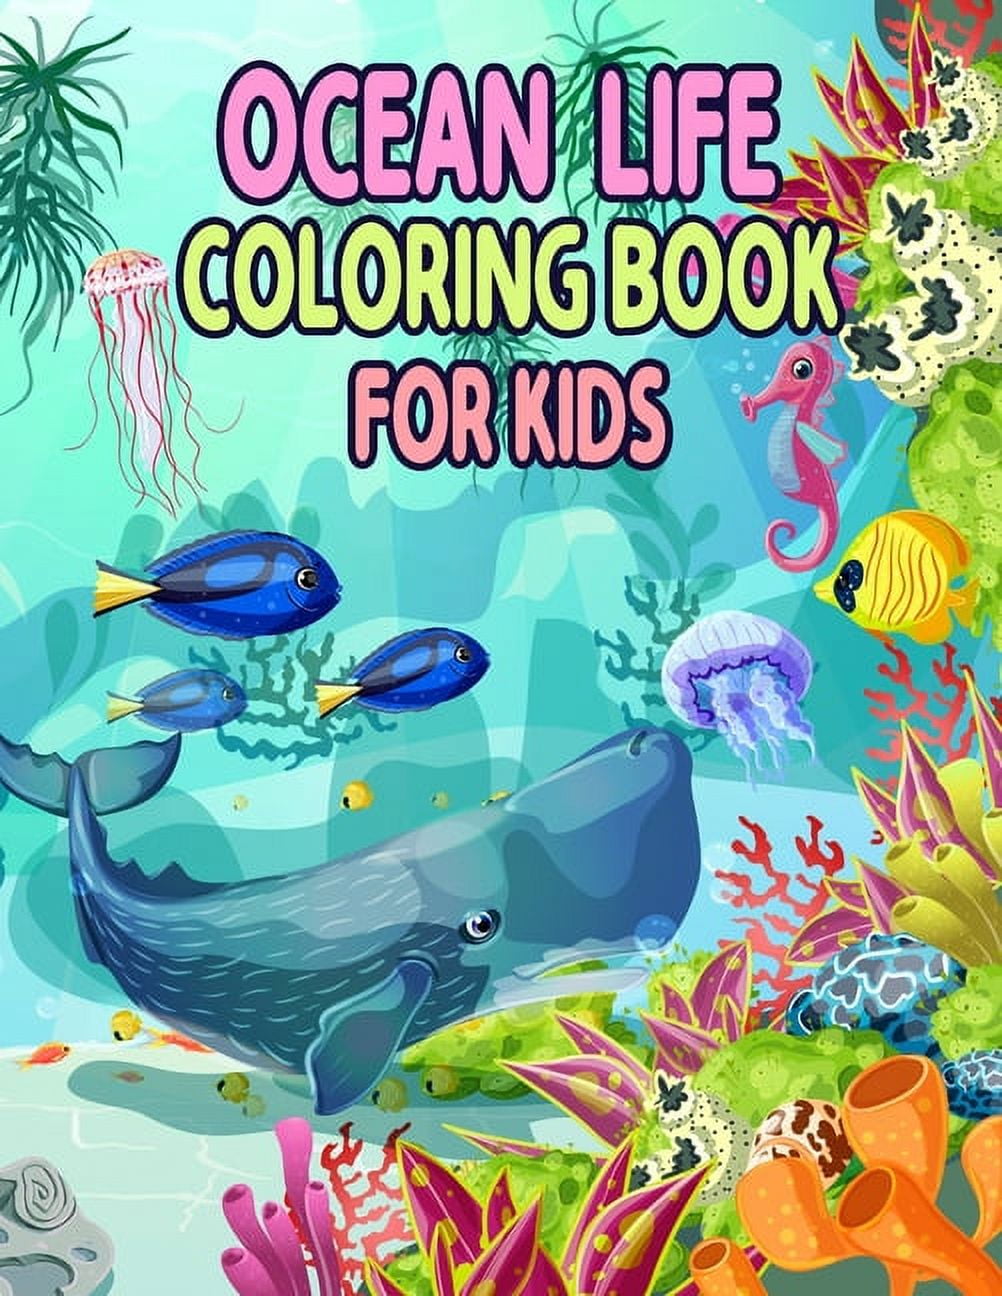 Adult Coloring Books: Sea World: Coloring Books for Adults Featuring 35  Beautiful Marine Life Designs (Hobby Habitat Coloring Books #7)